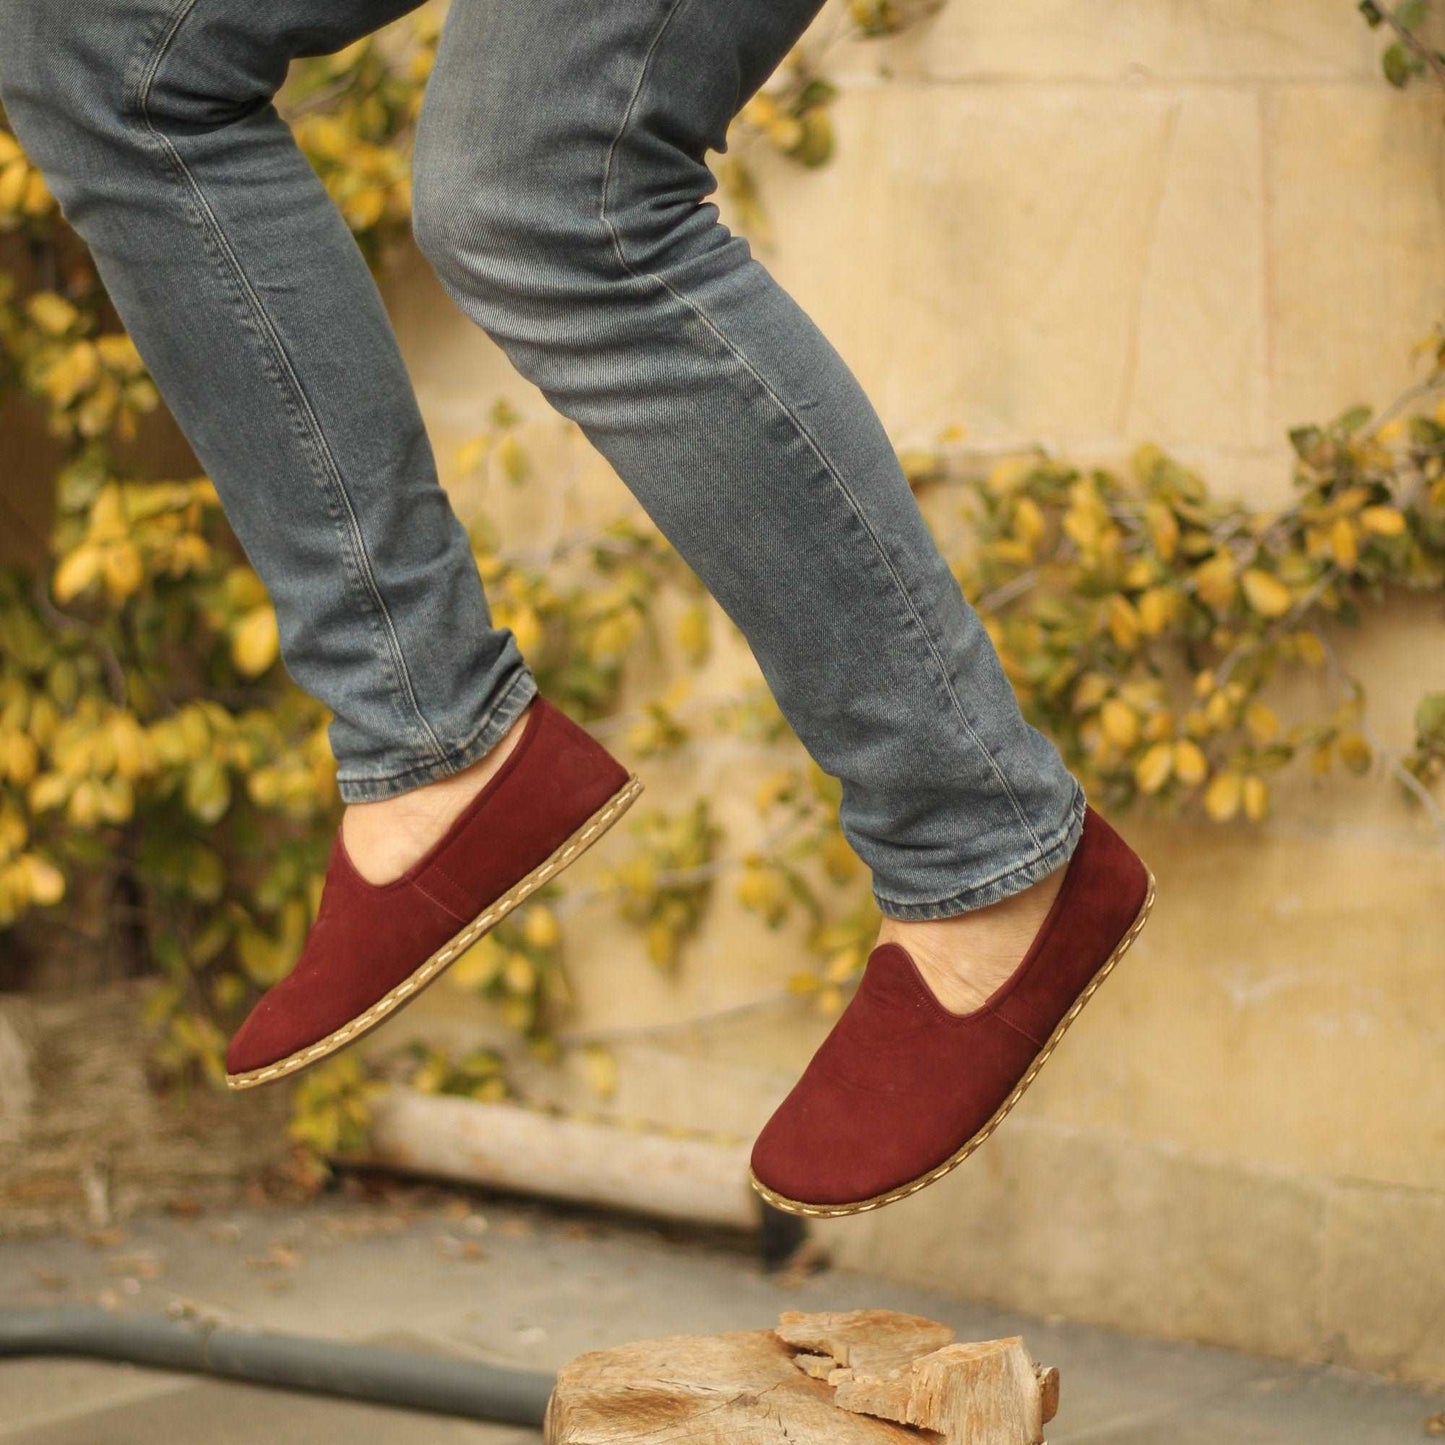 Men's Barefoot Shoes, handmade claret red leather